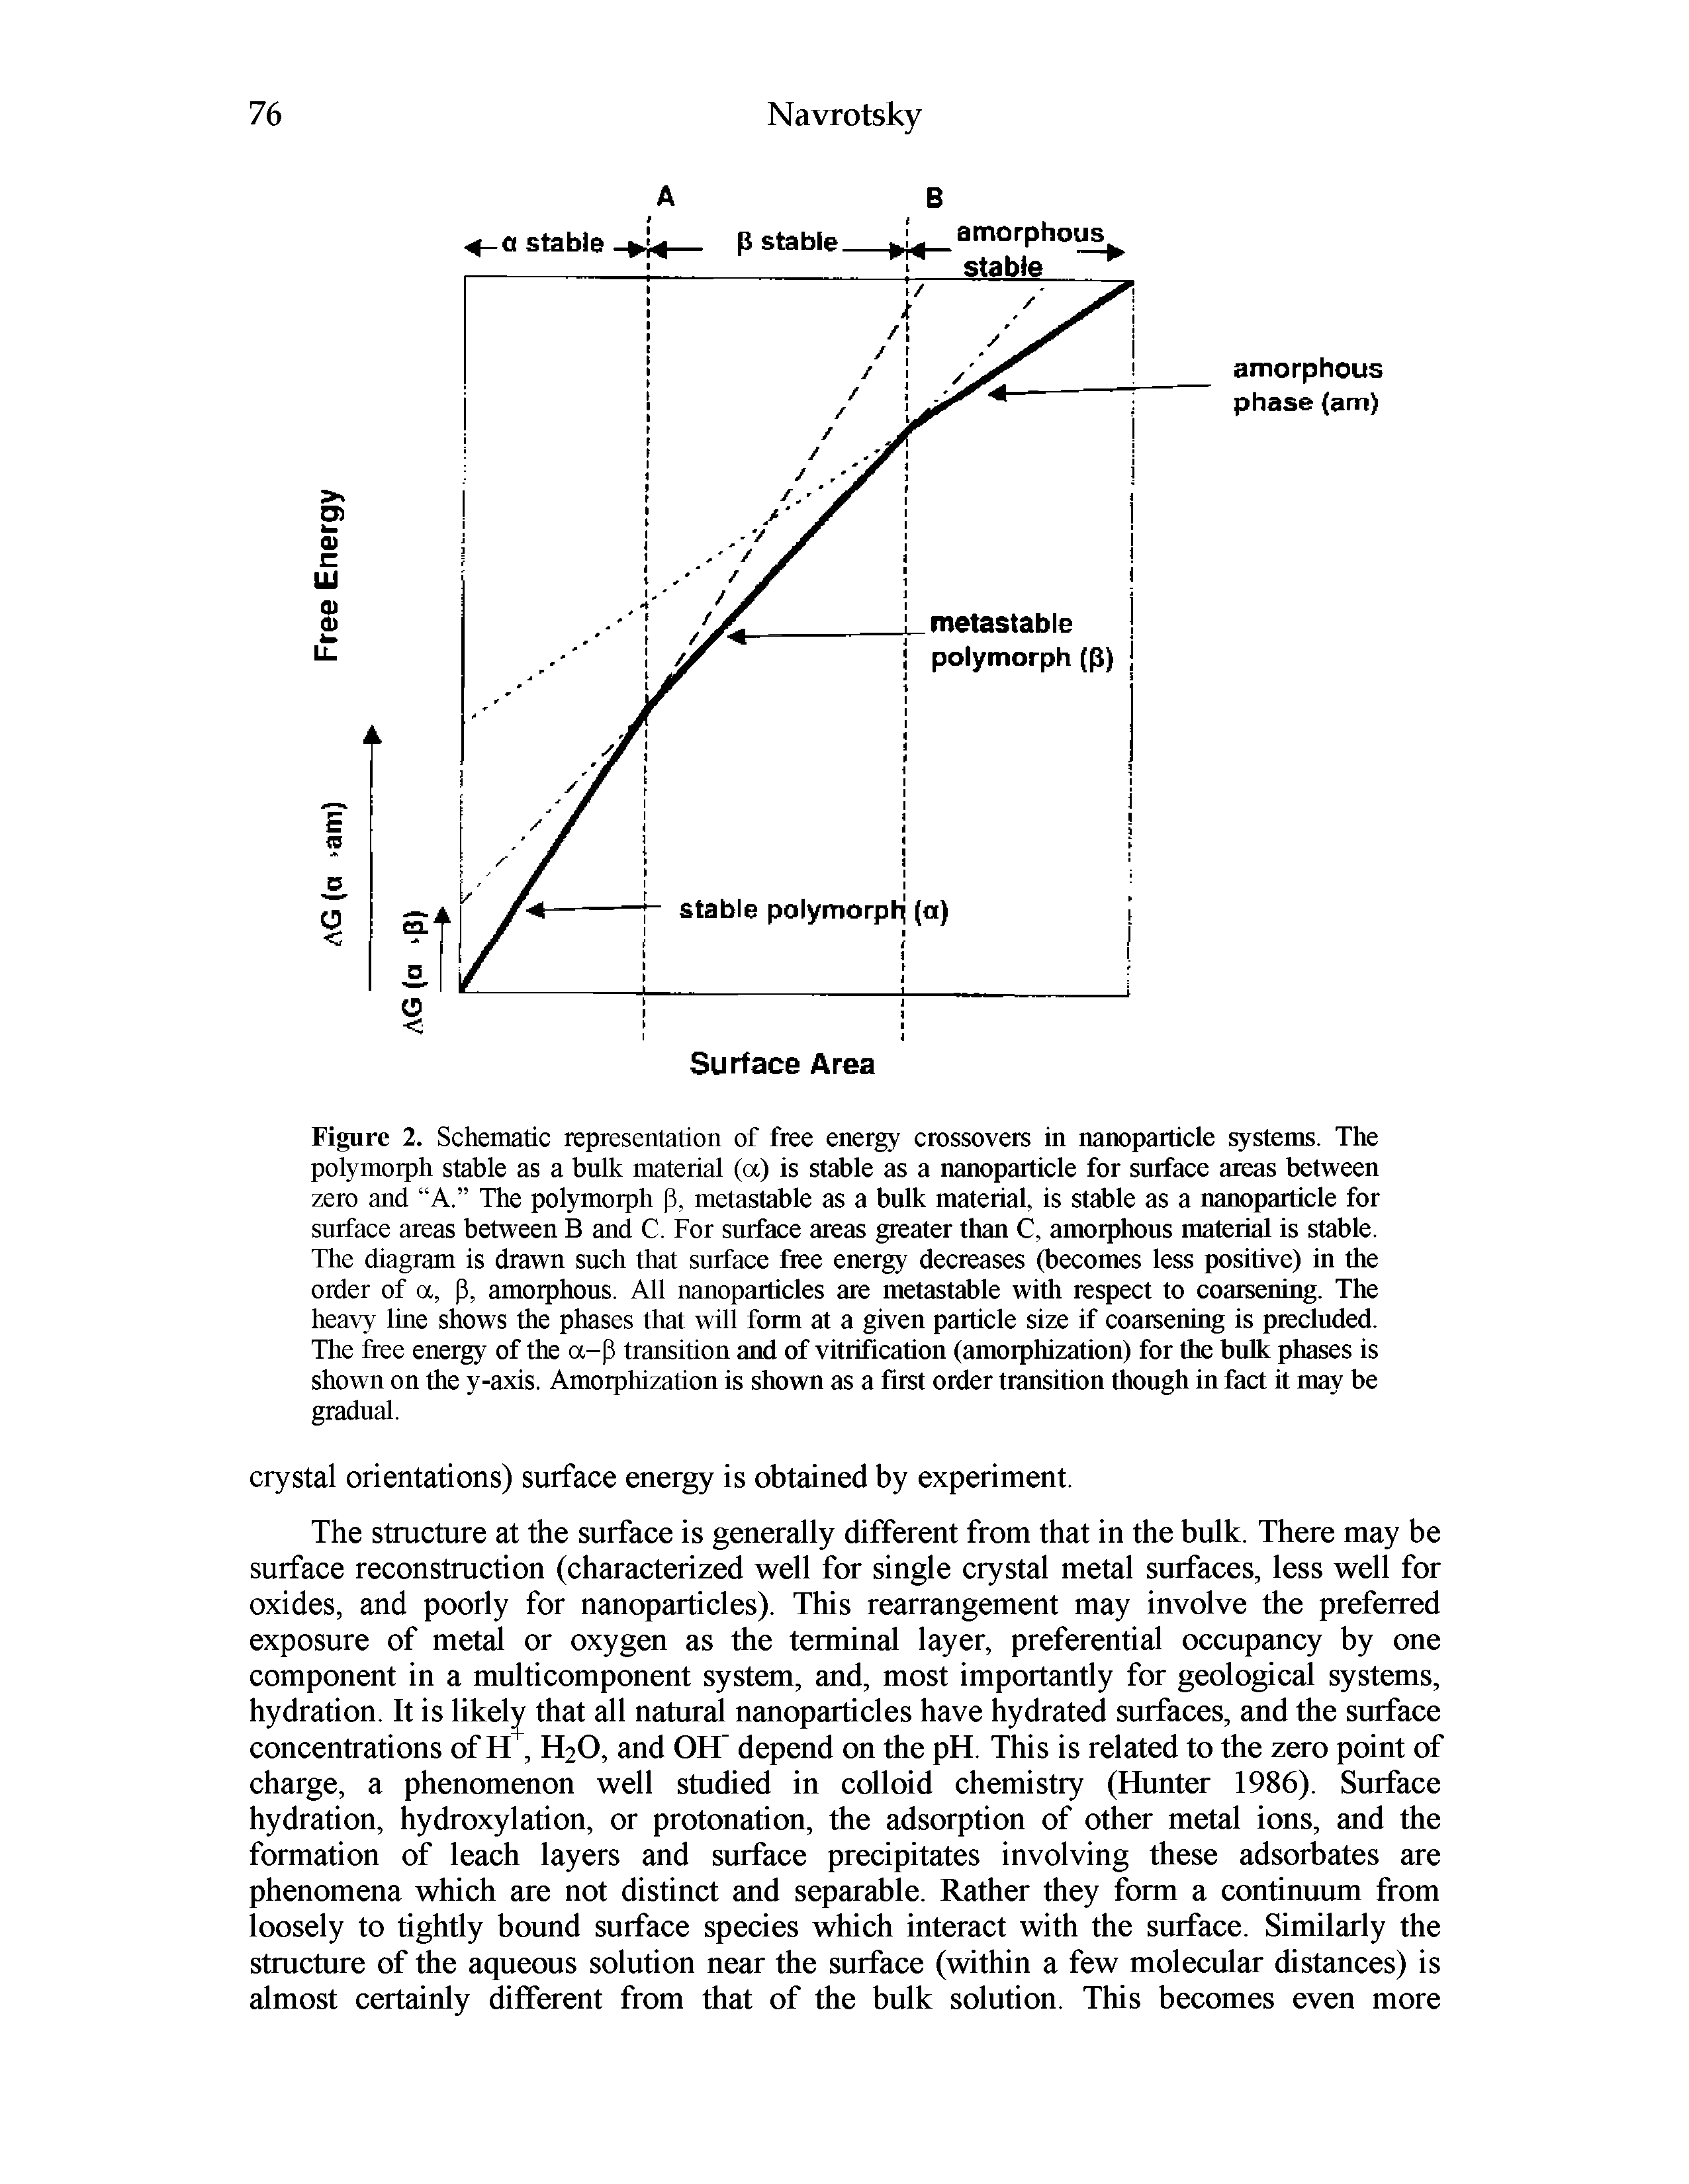 Figure 2. Schematic representation of free energy crossovers in nanoparticle systems. The polymorph stable as a bulk material (a) is stable as a nanoparticle for surface areas between zero and A. The polymorph p, metastable as a bulk material, is stable as a nanoparticle for surface areas between B and C. For surface areas greater than C, amorphous material is stable.